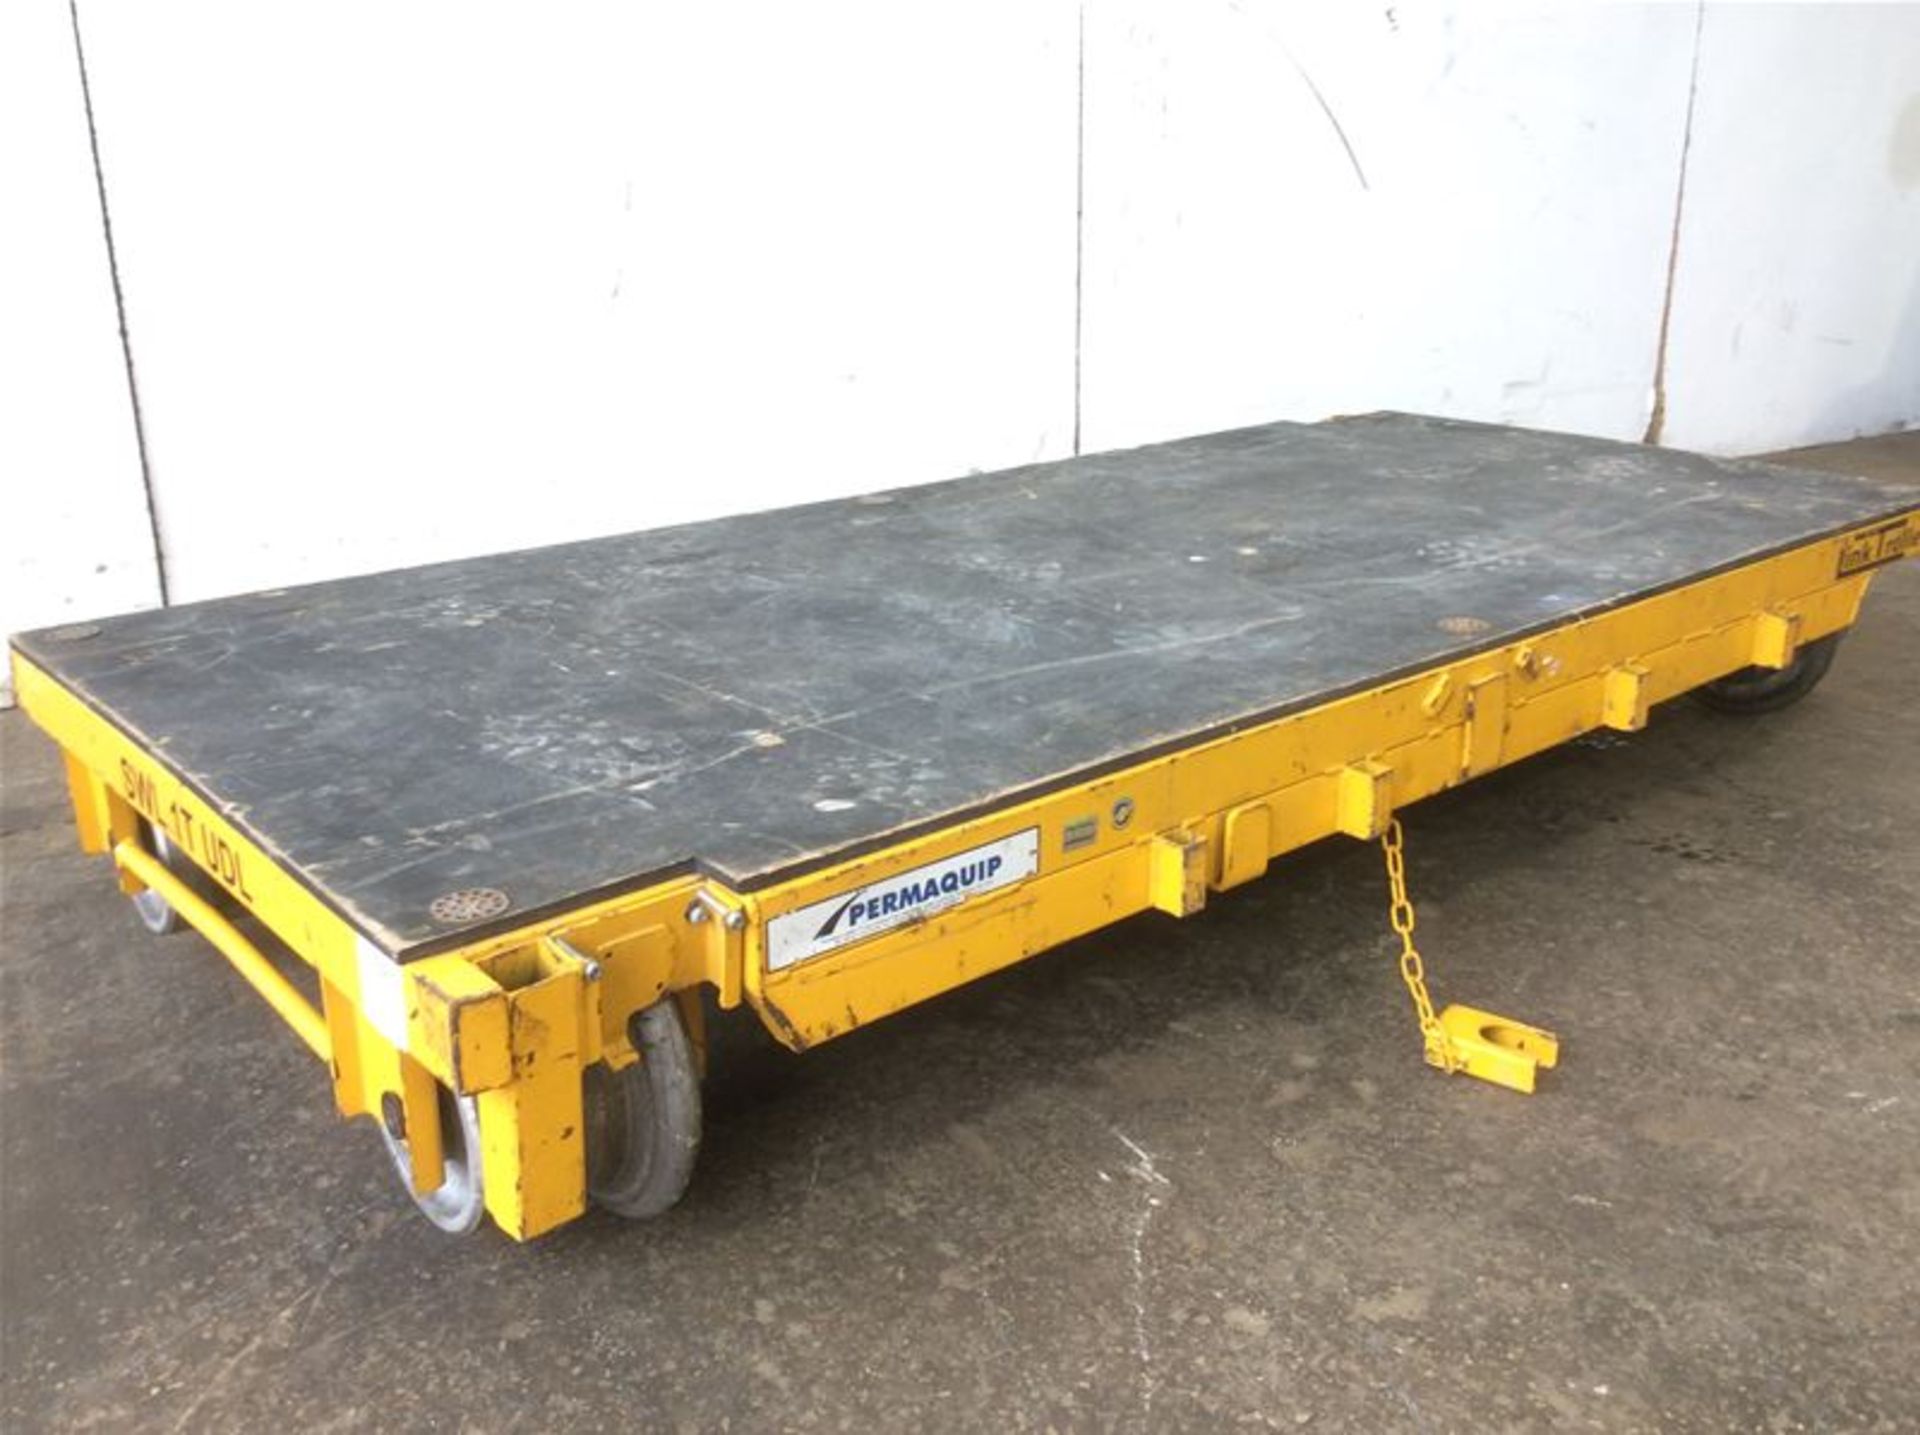 PREMAQUIP GROUP ENG INSULATED RAIL LINK TROLLEY - SWL 1T UDL